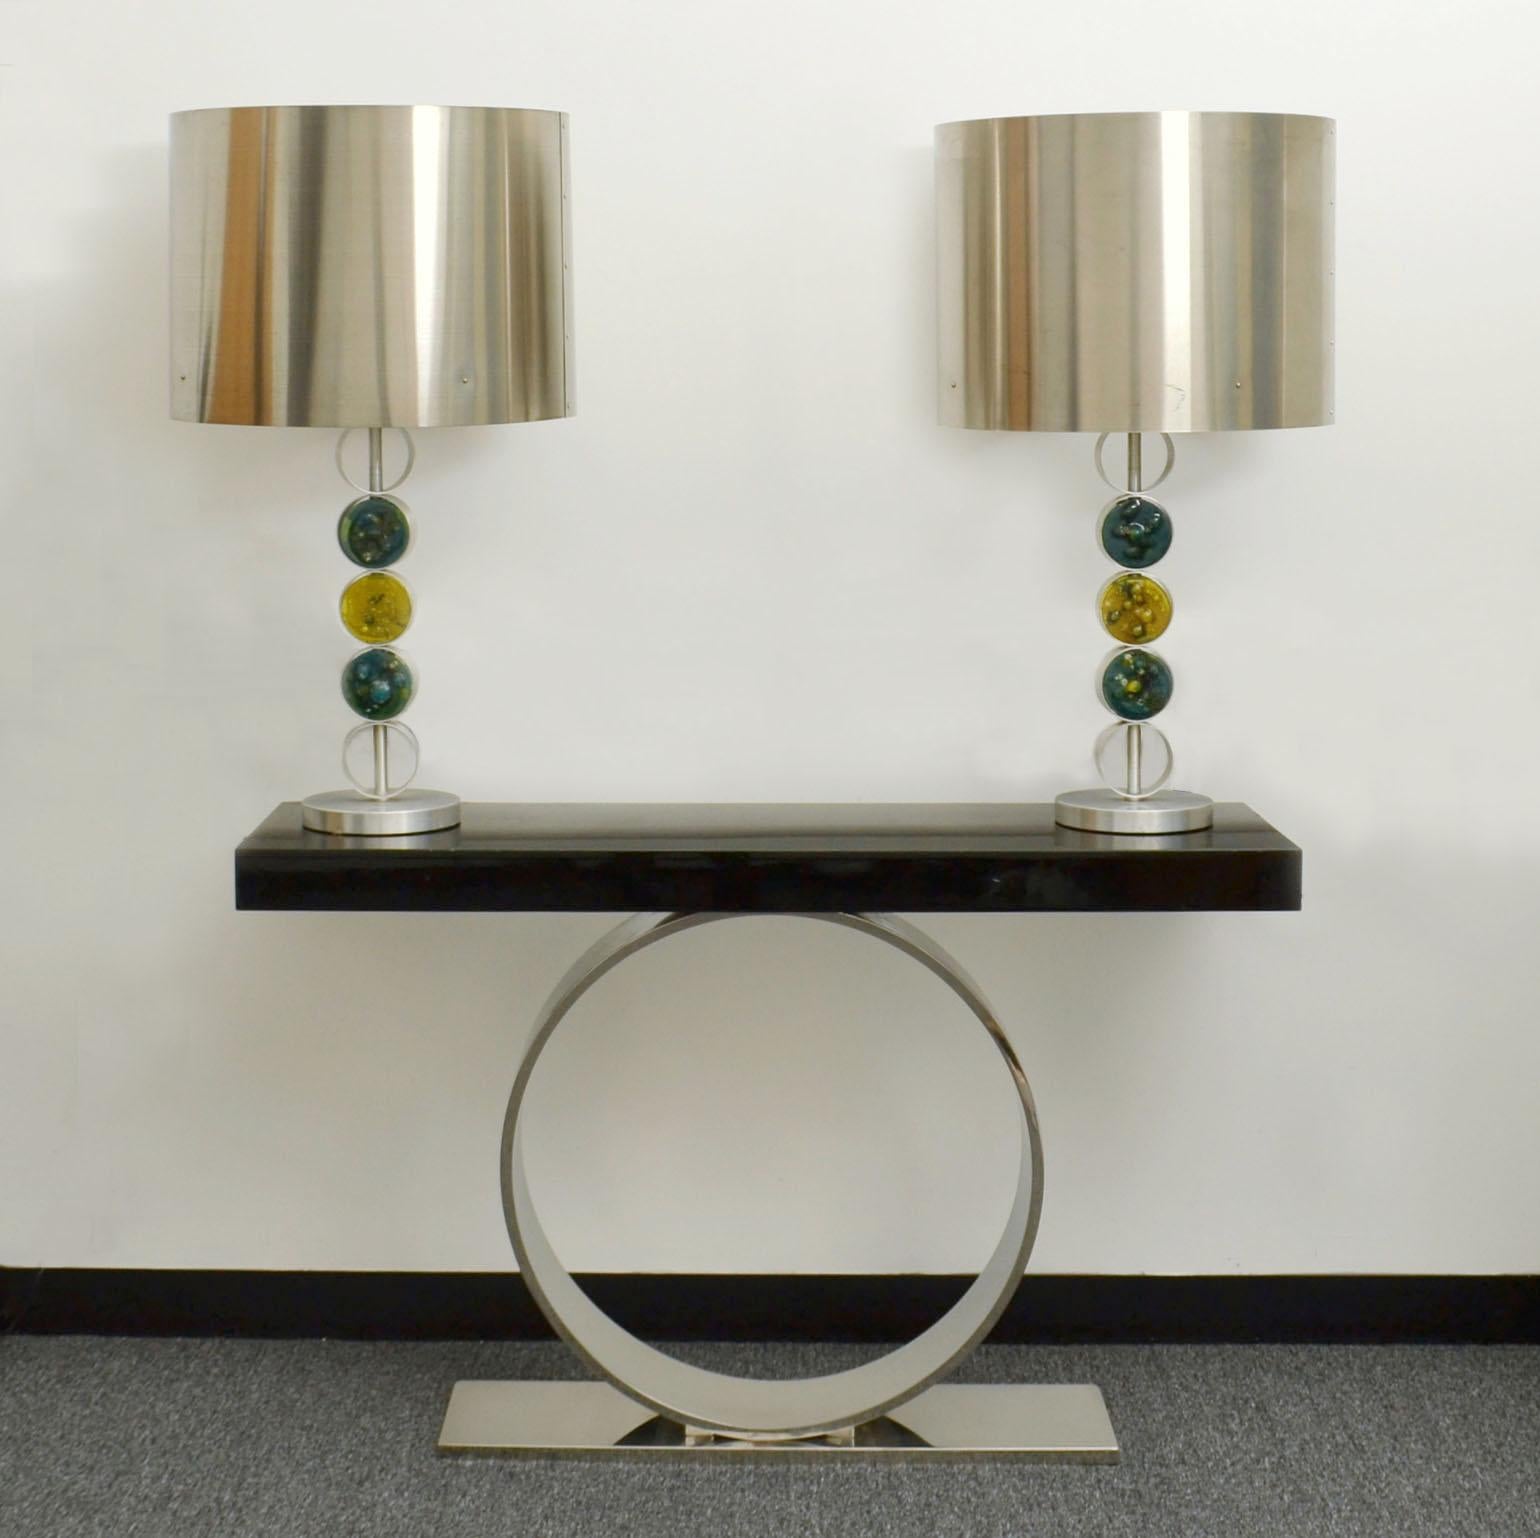 The RAAK table lamps are large, modern and of a simple design executed in aluminum, stainless steel and handmade glass, 1972 in The Netherlands. These lamps are attributed to the designer Nanny Still, one of the most famous designers at the